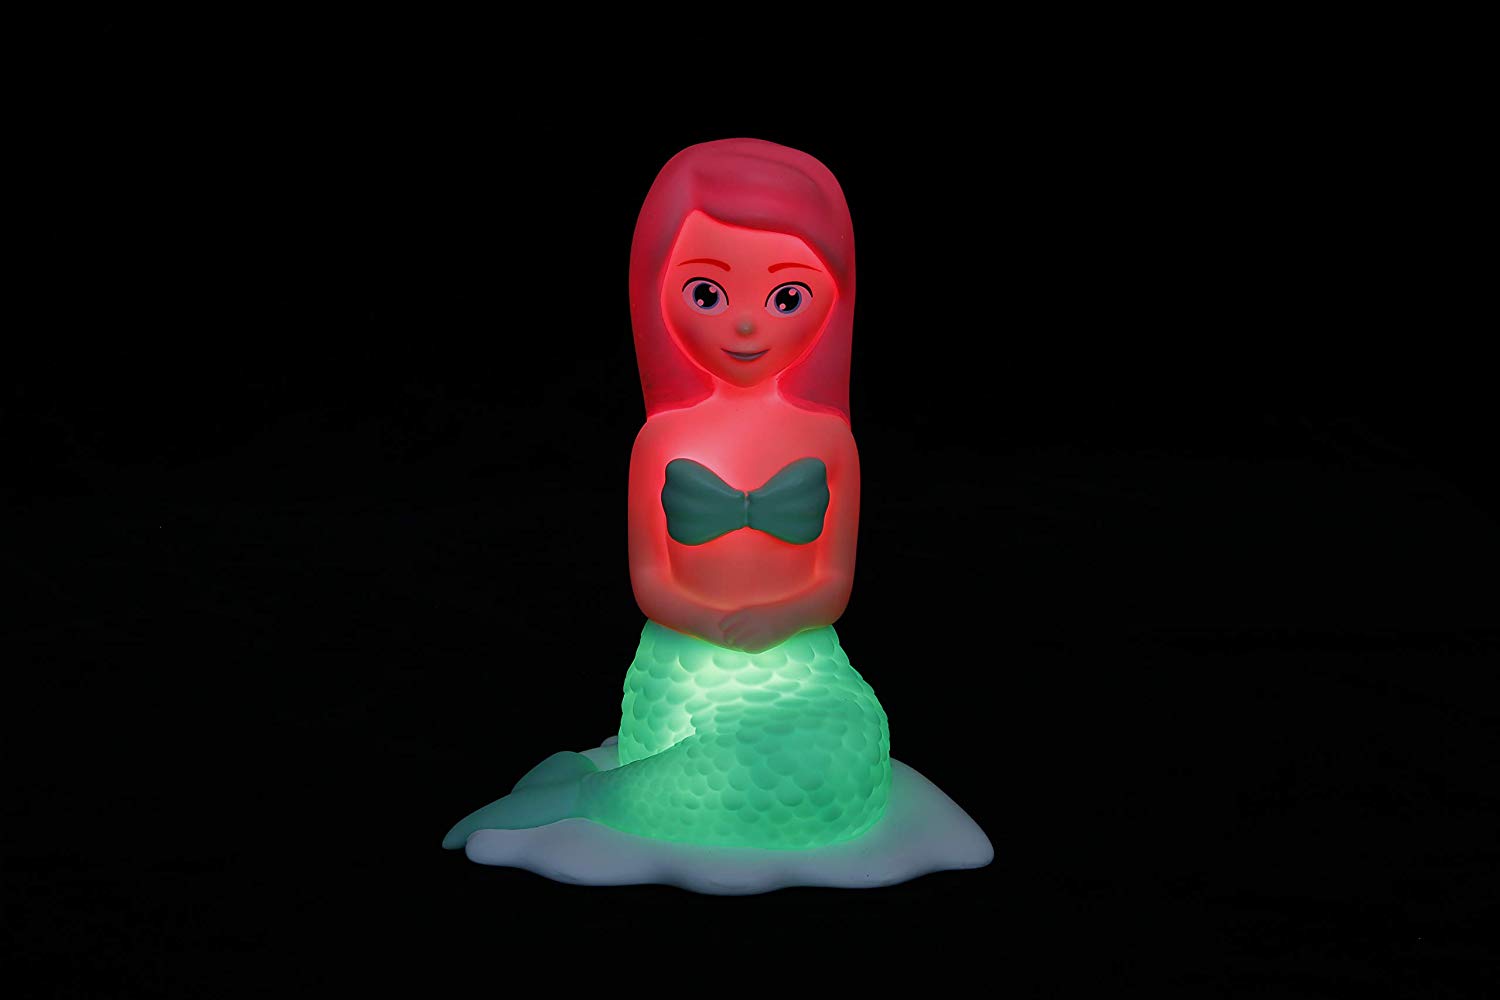 Colour Changing Mermaid Mood Night Light + 15 Minute Timer